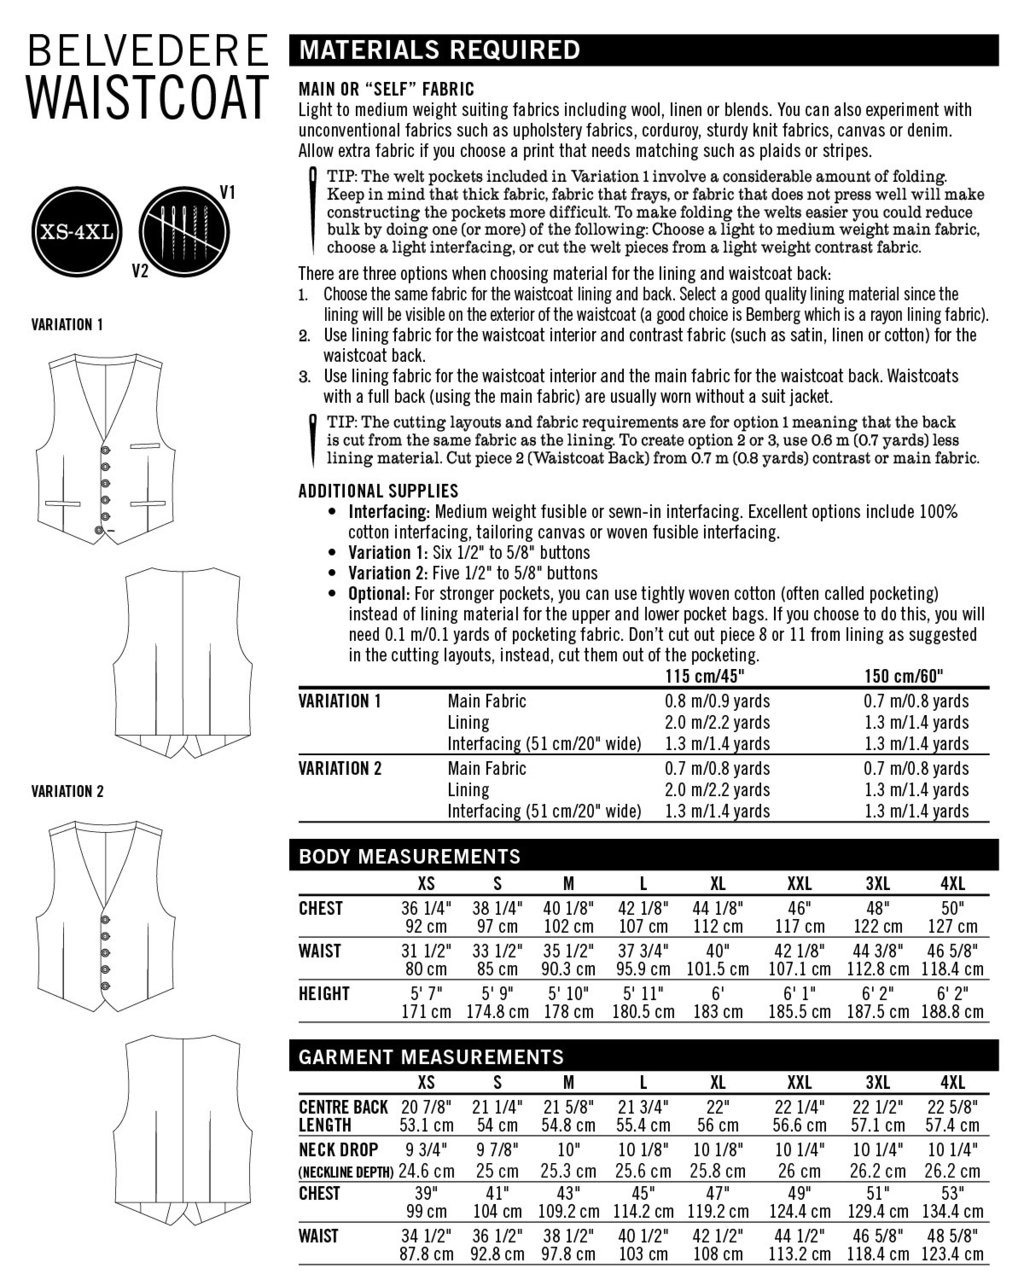 Thread Theory Designs Belvedere Waistcoat 11 pattern review by twgeng